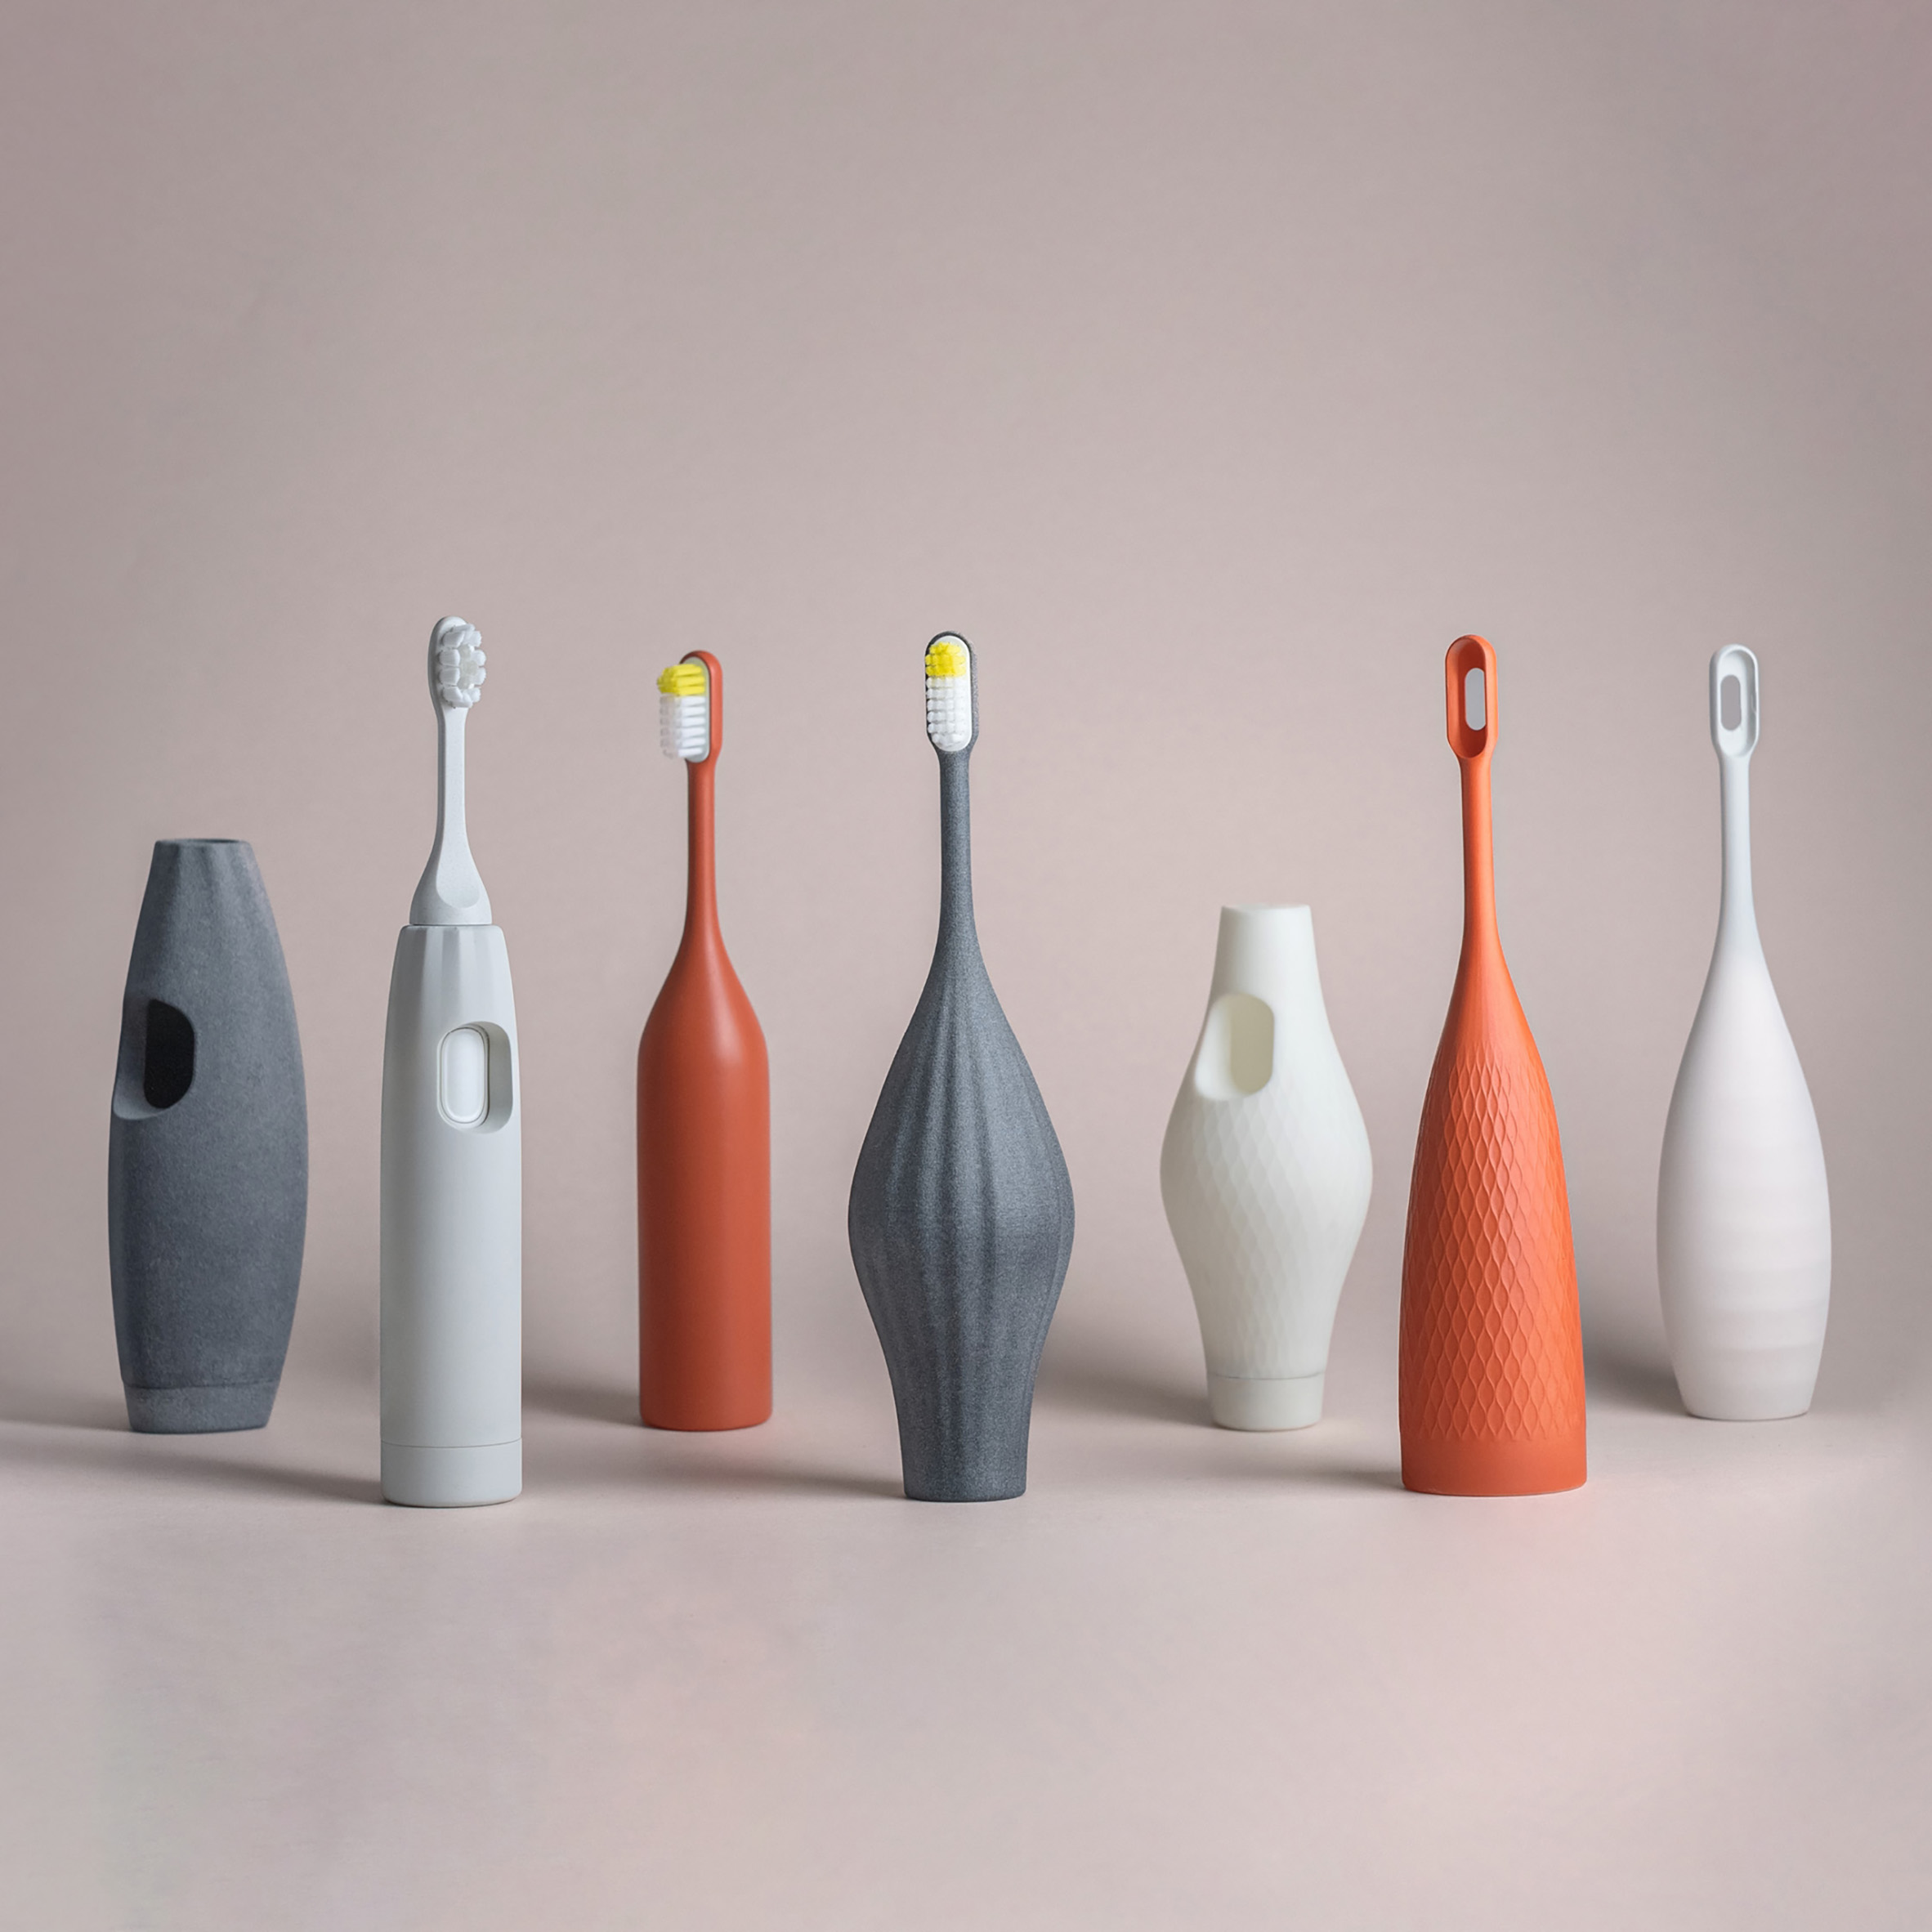 Access-ories toothbrush handles by Landor & Fitch